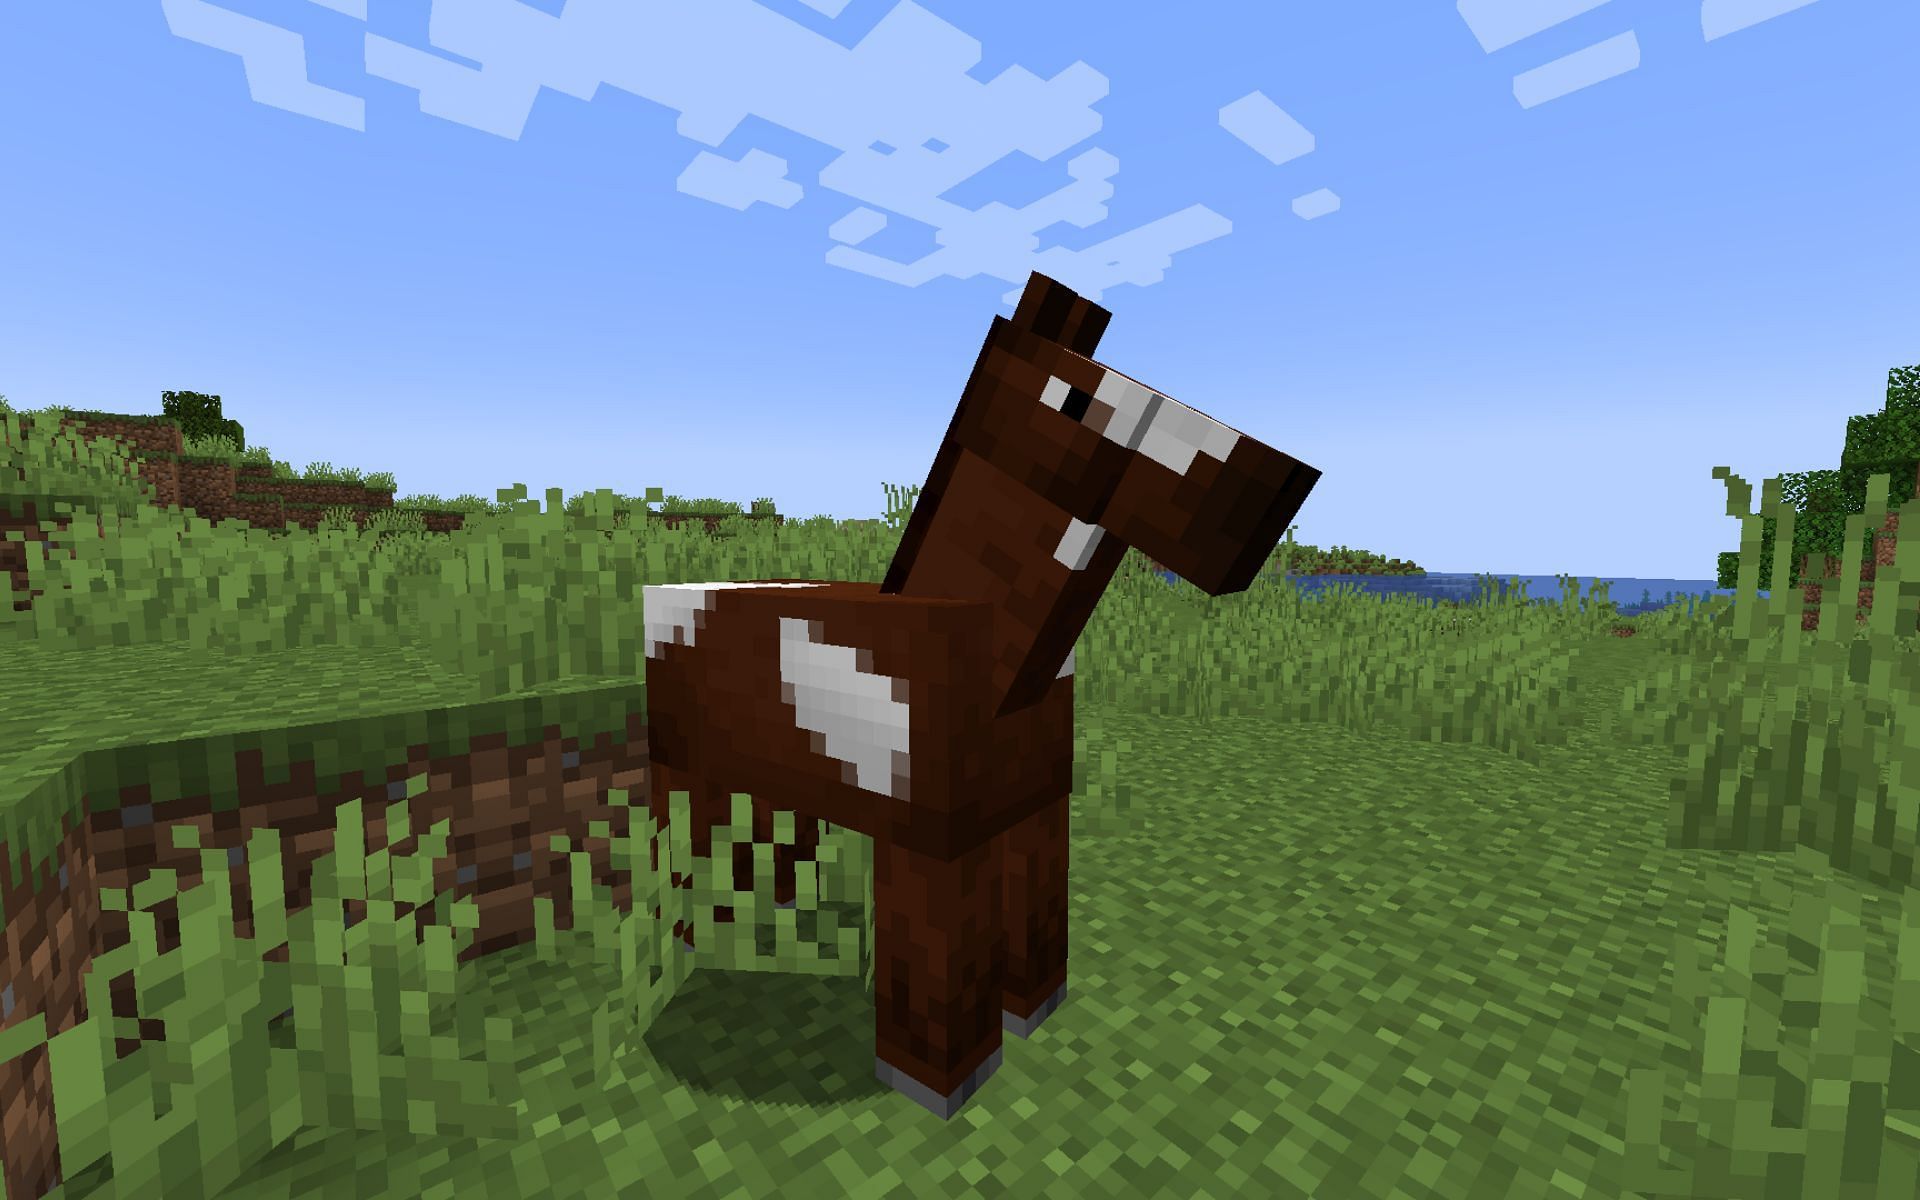 Horses need golden food items to breed in Minecraft (Image via Mojang)